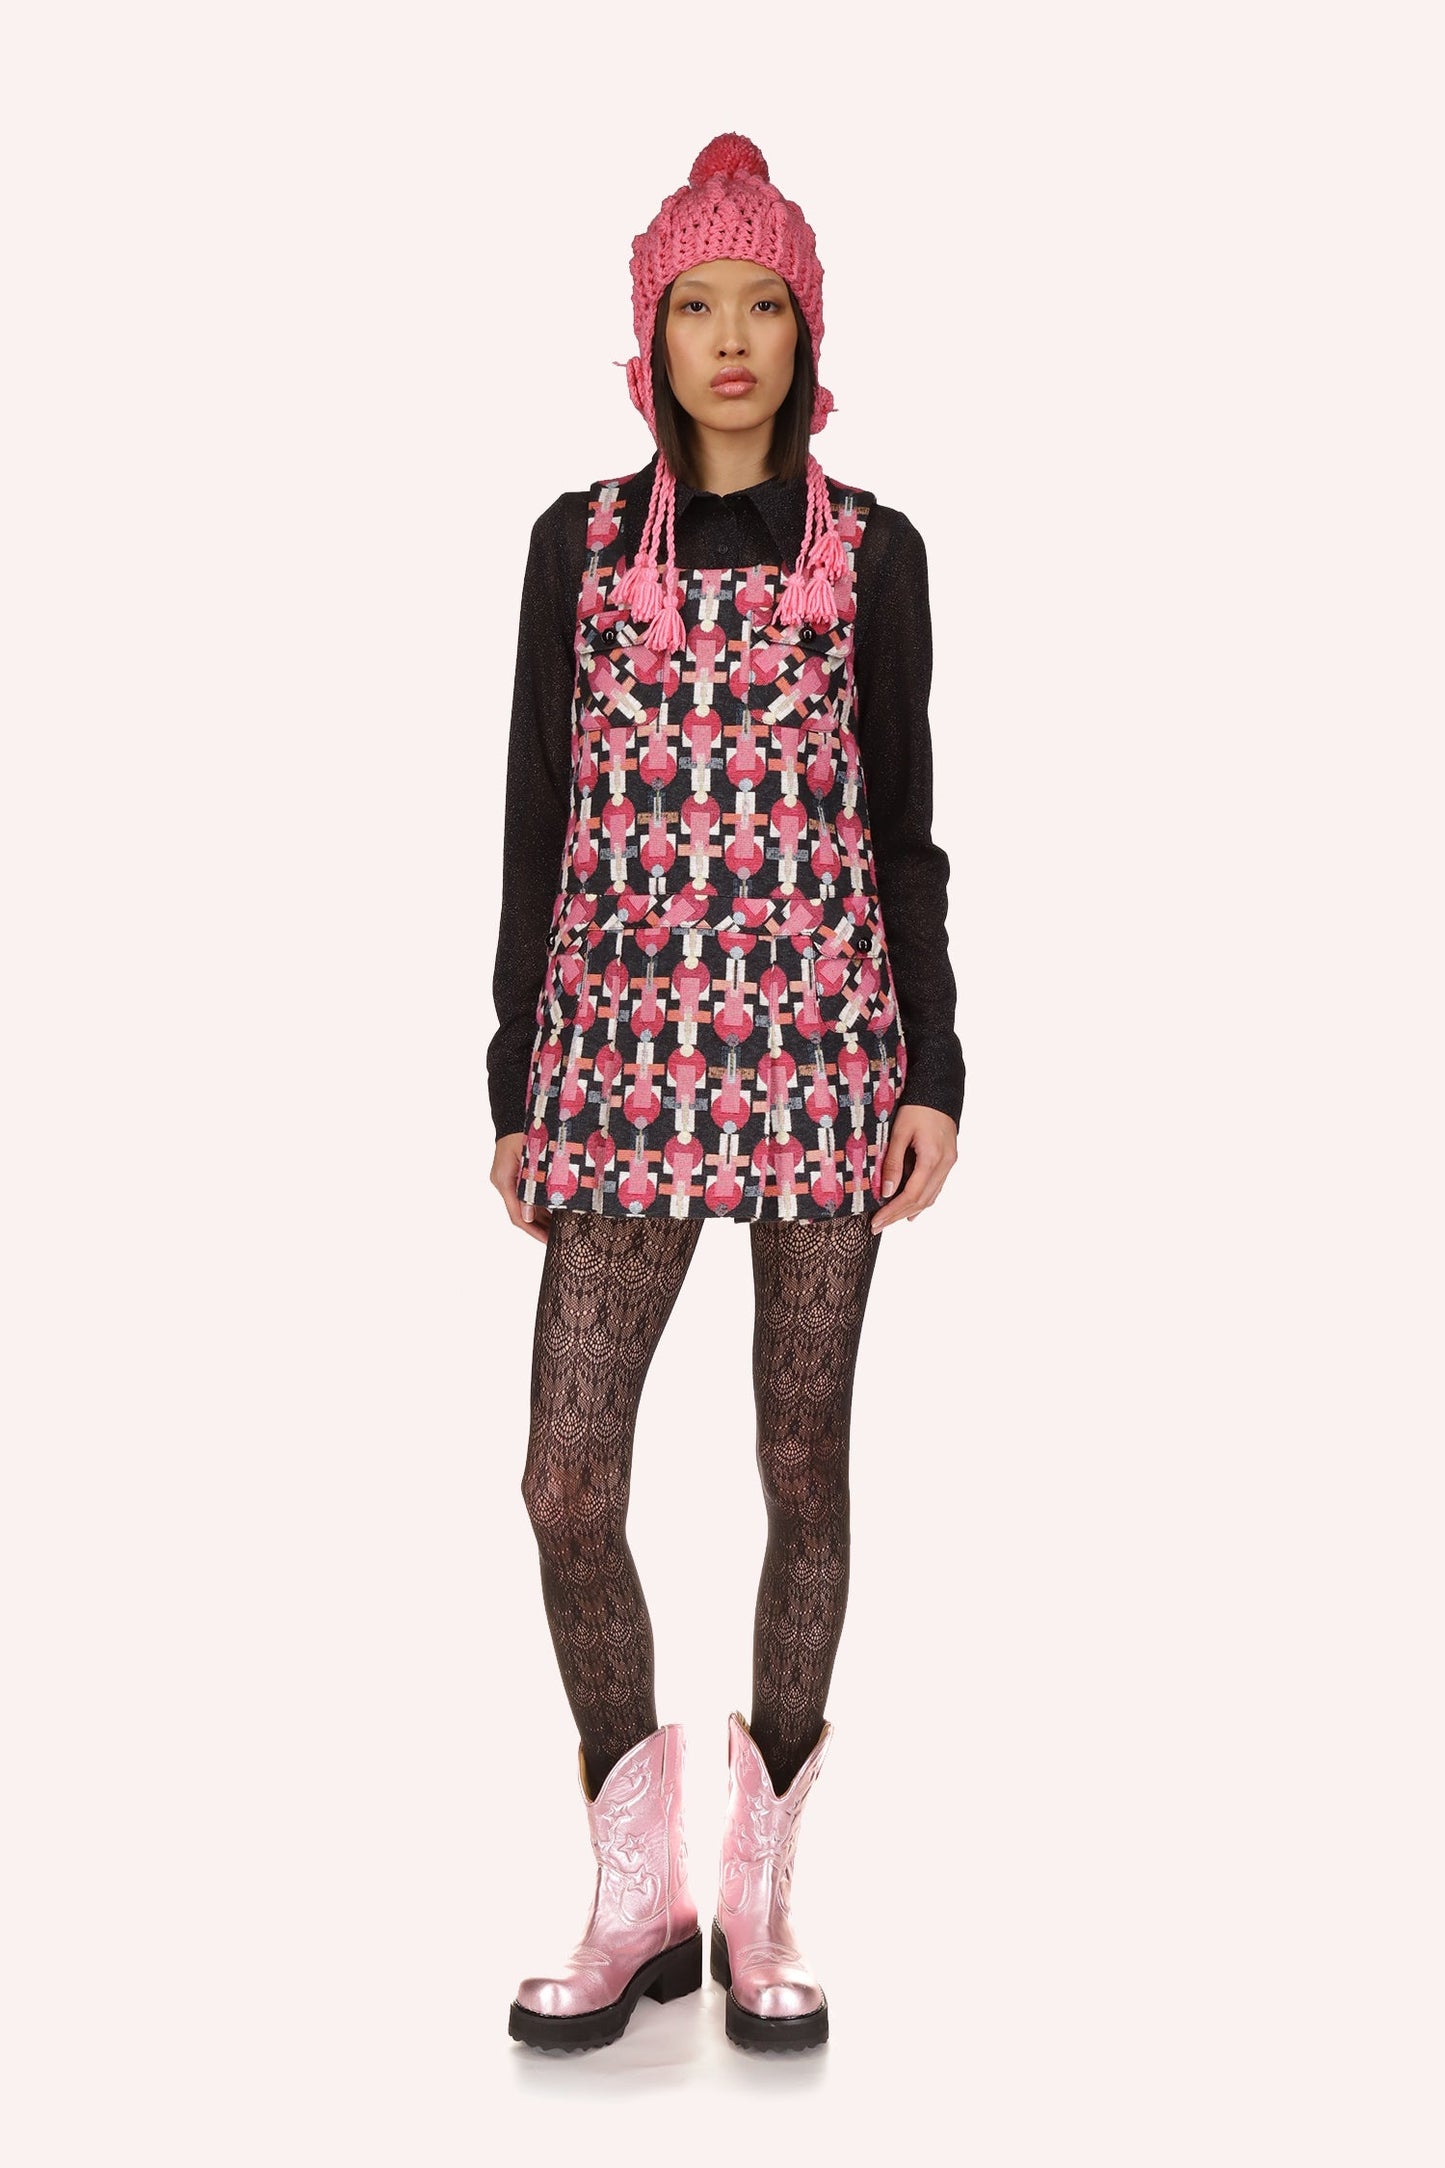 Geo Jacquard Pleated Dress, floral pattern hue pink and red on black, sleeveless dress, 2-straps